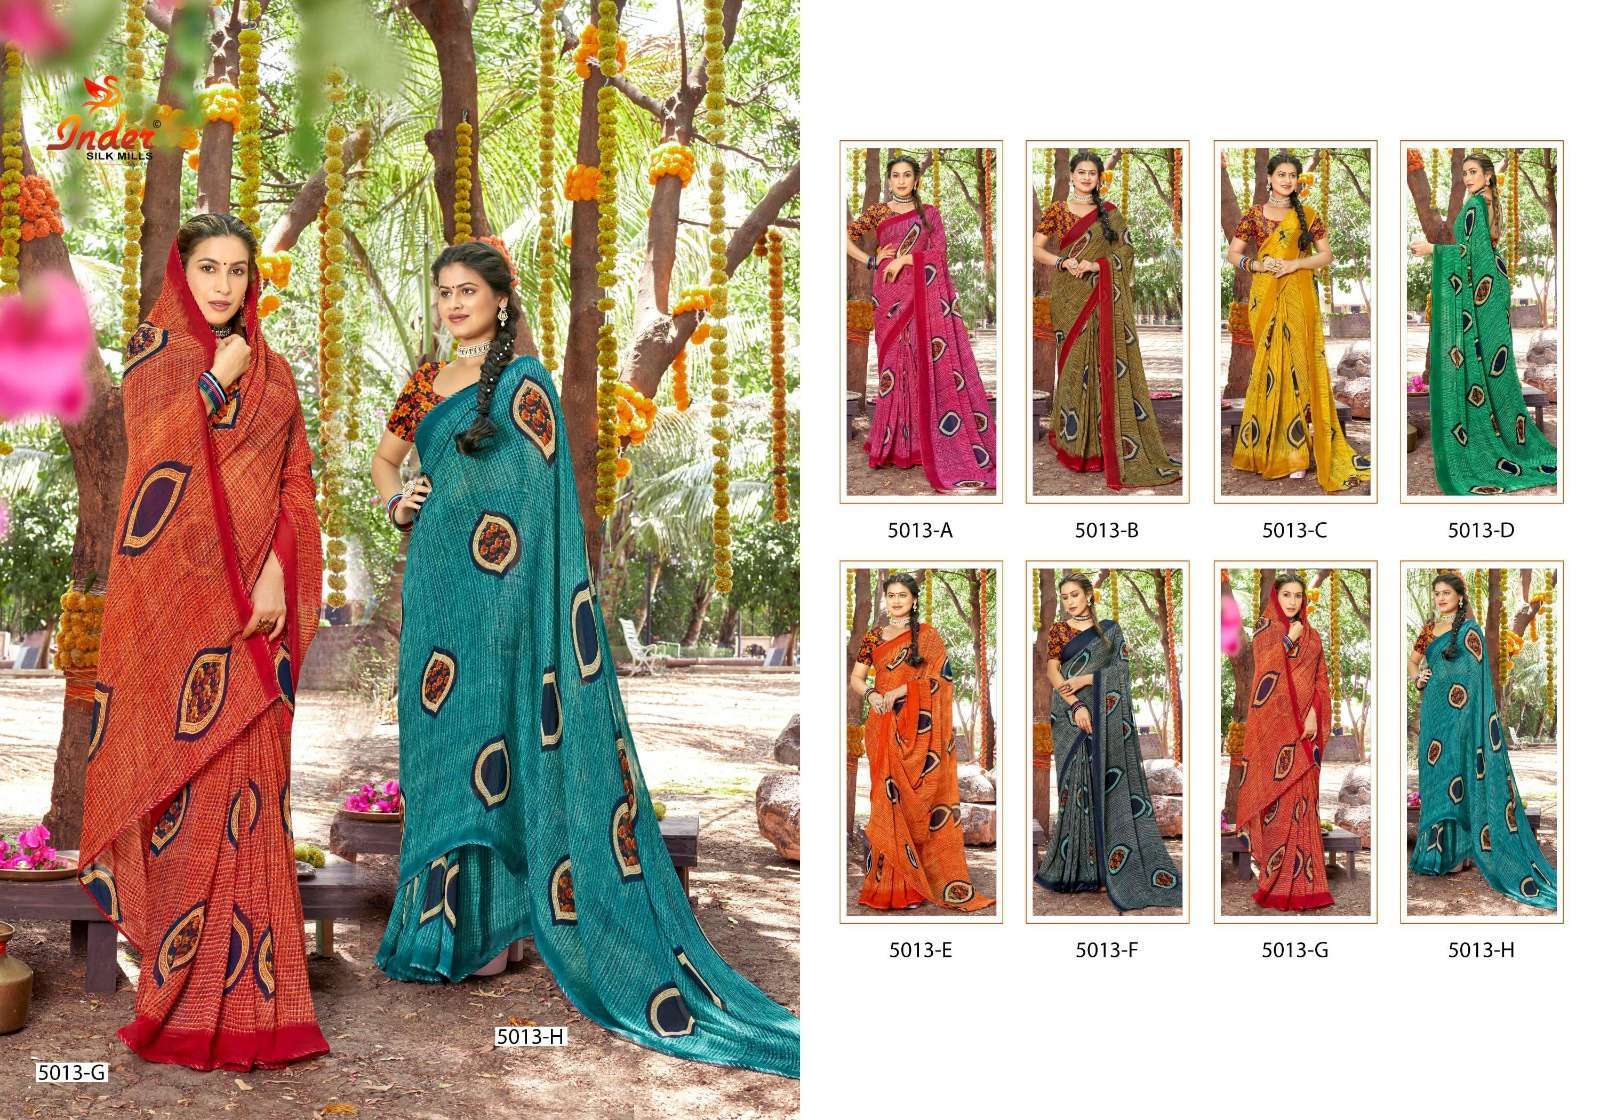 TANTRA BY INDER SILK CASUAL WEAR SAREE Wholesale catalog